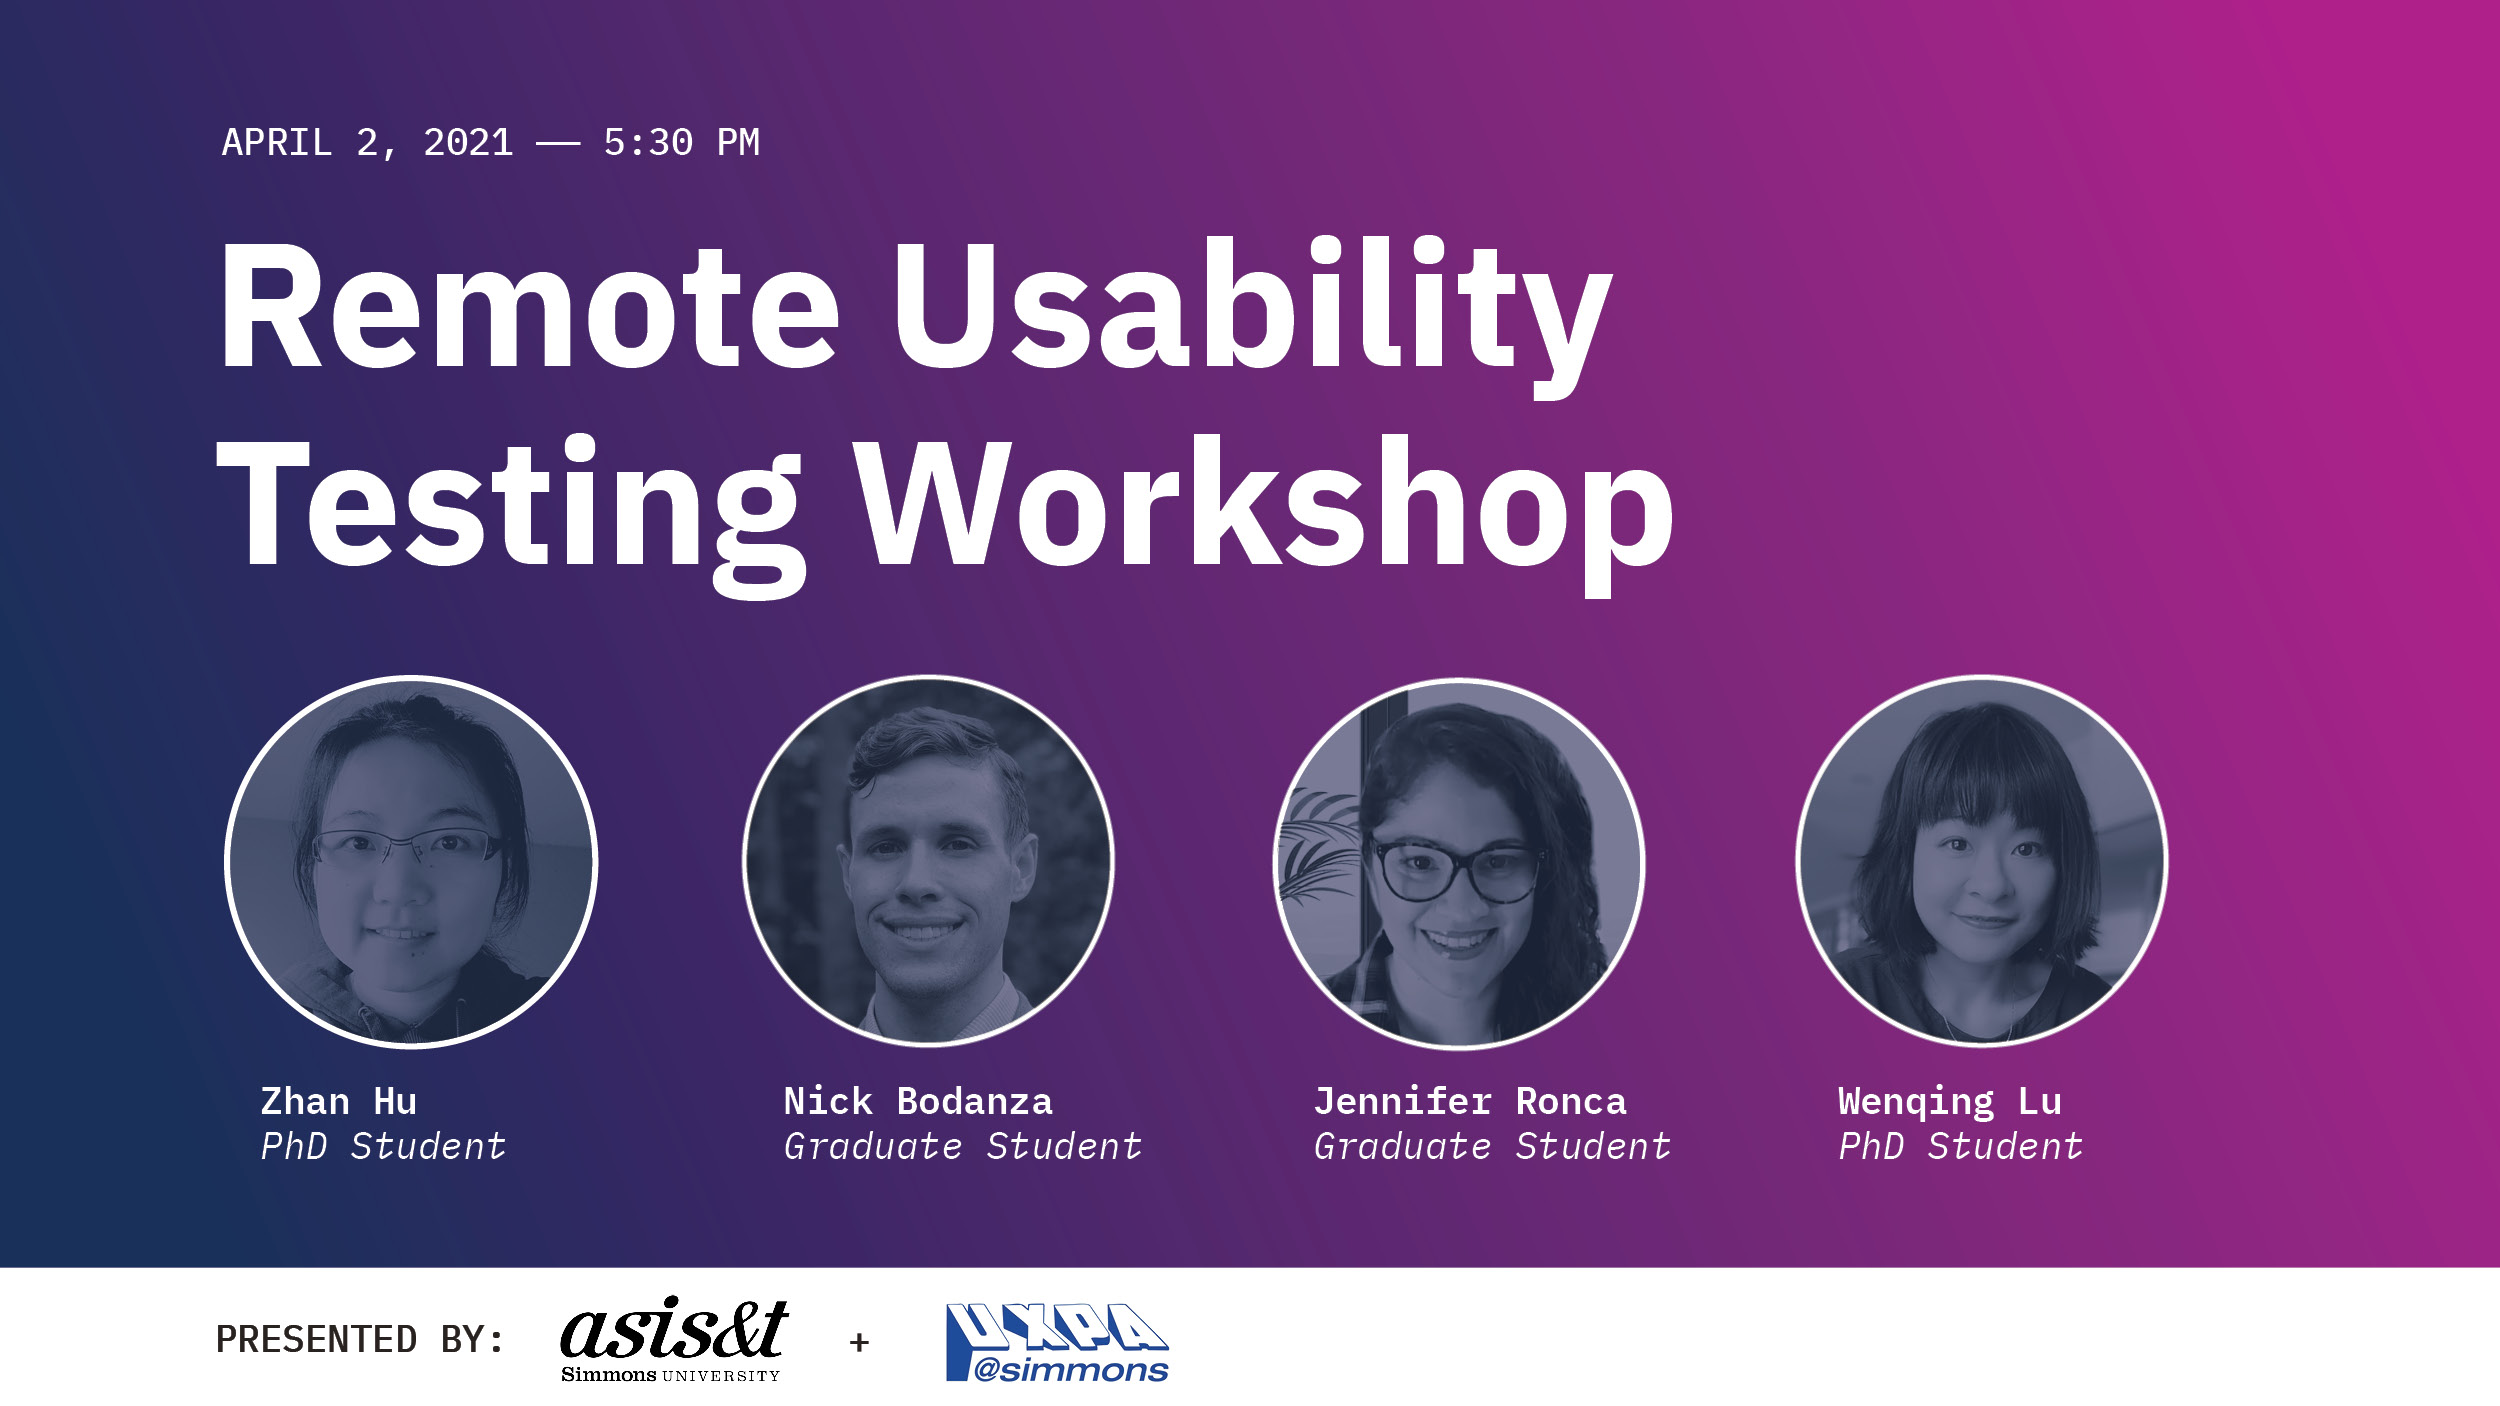 April 2, 2021 5:30pm. Remote Usability Testing Workshop. Presented by ASIS&T Simmons University and UXPA@Simmons.